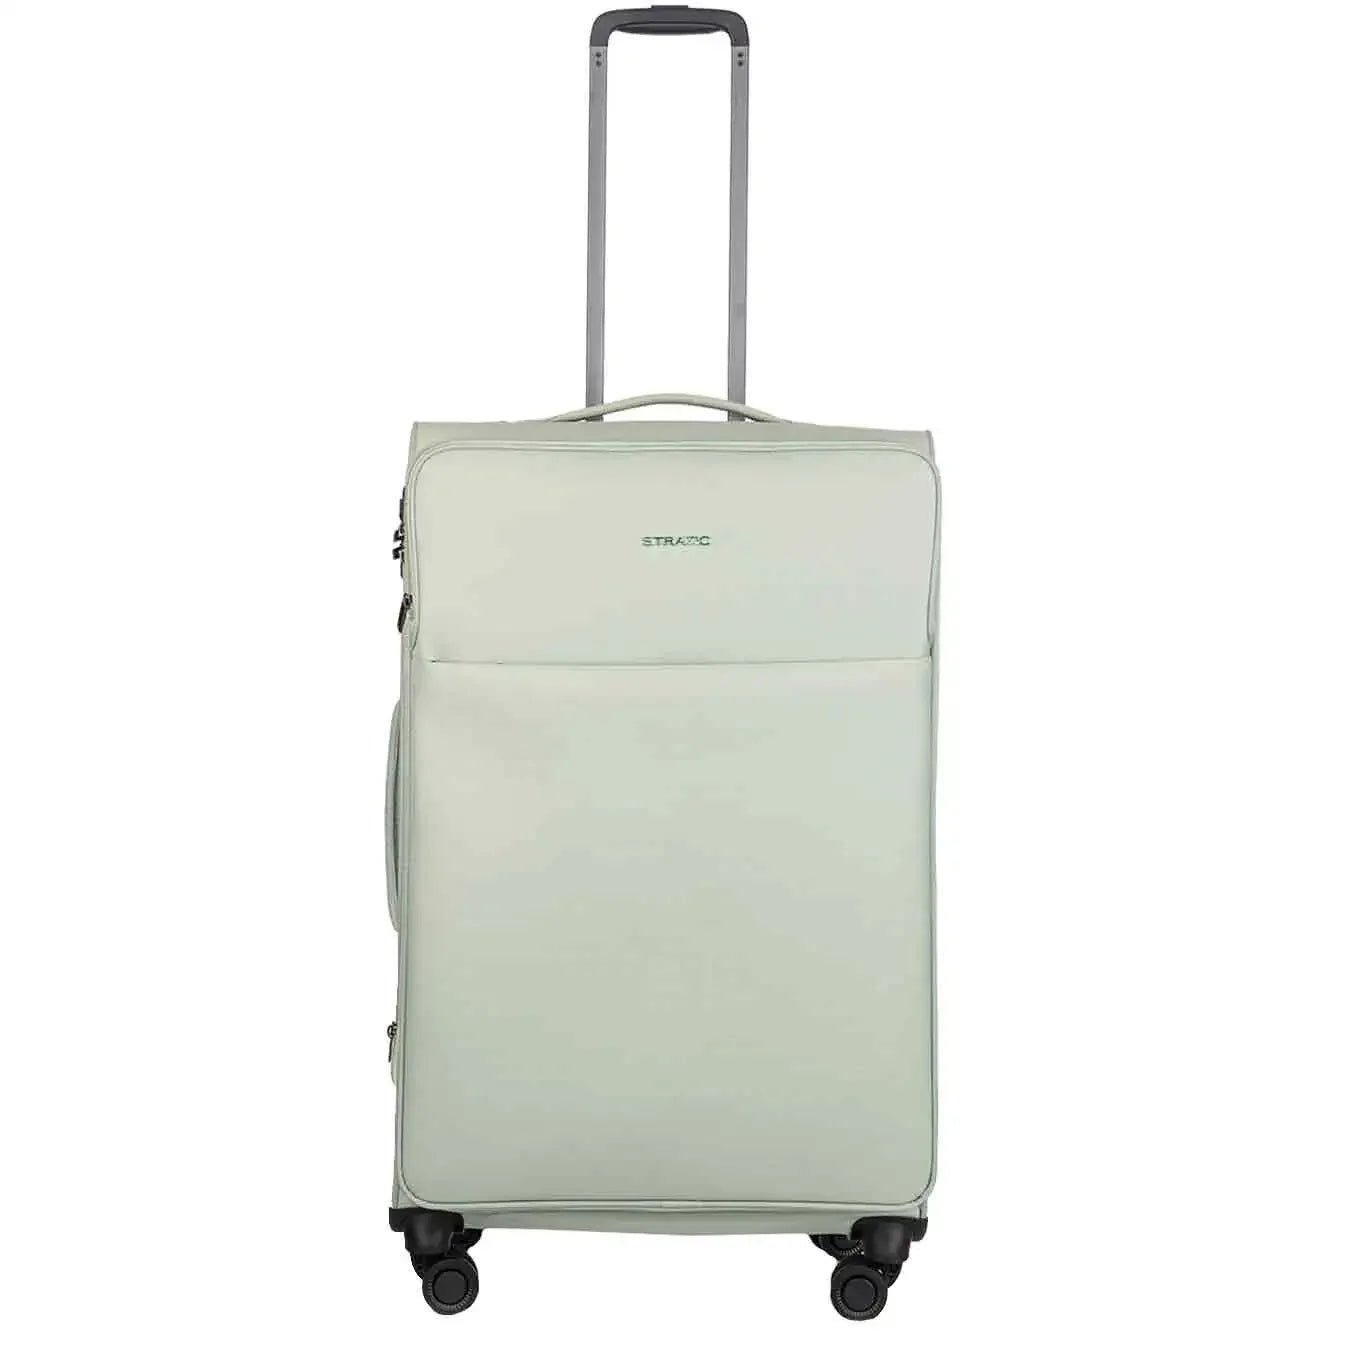 Stratic Light + trolley 4 roues 80 cm - Menthe